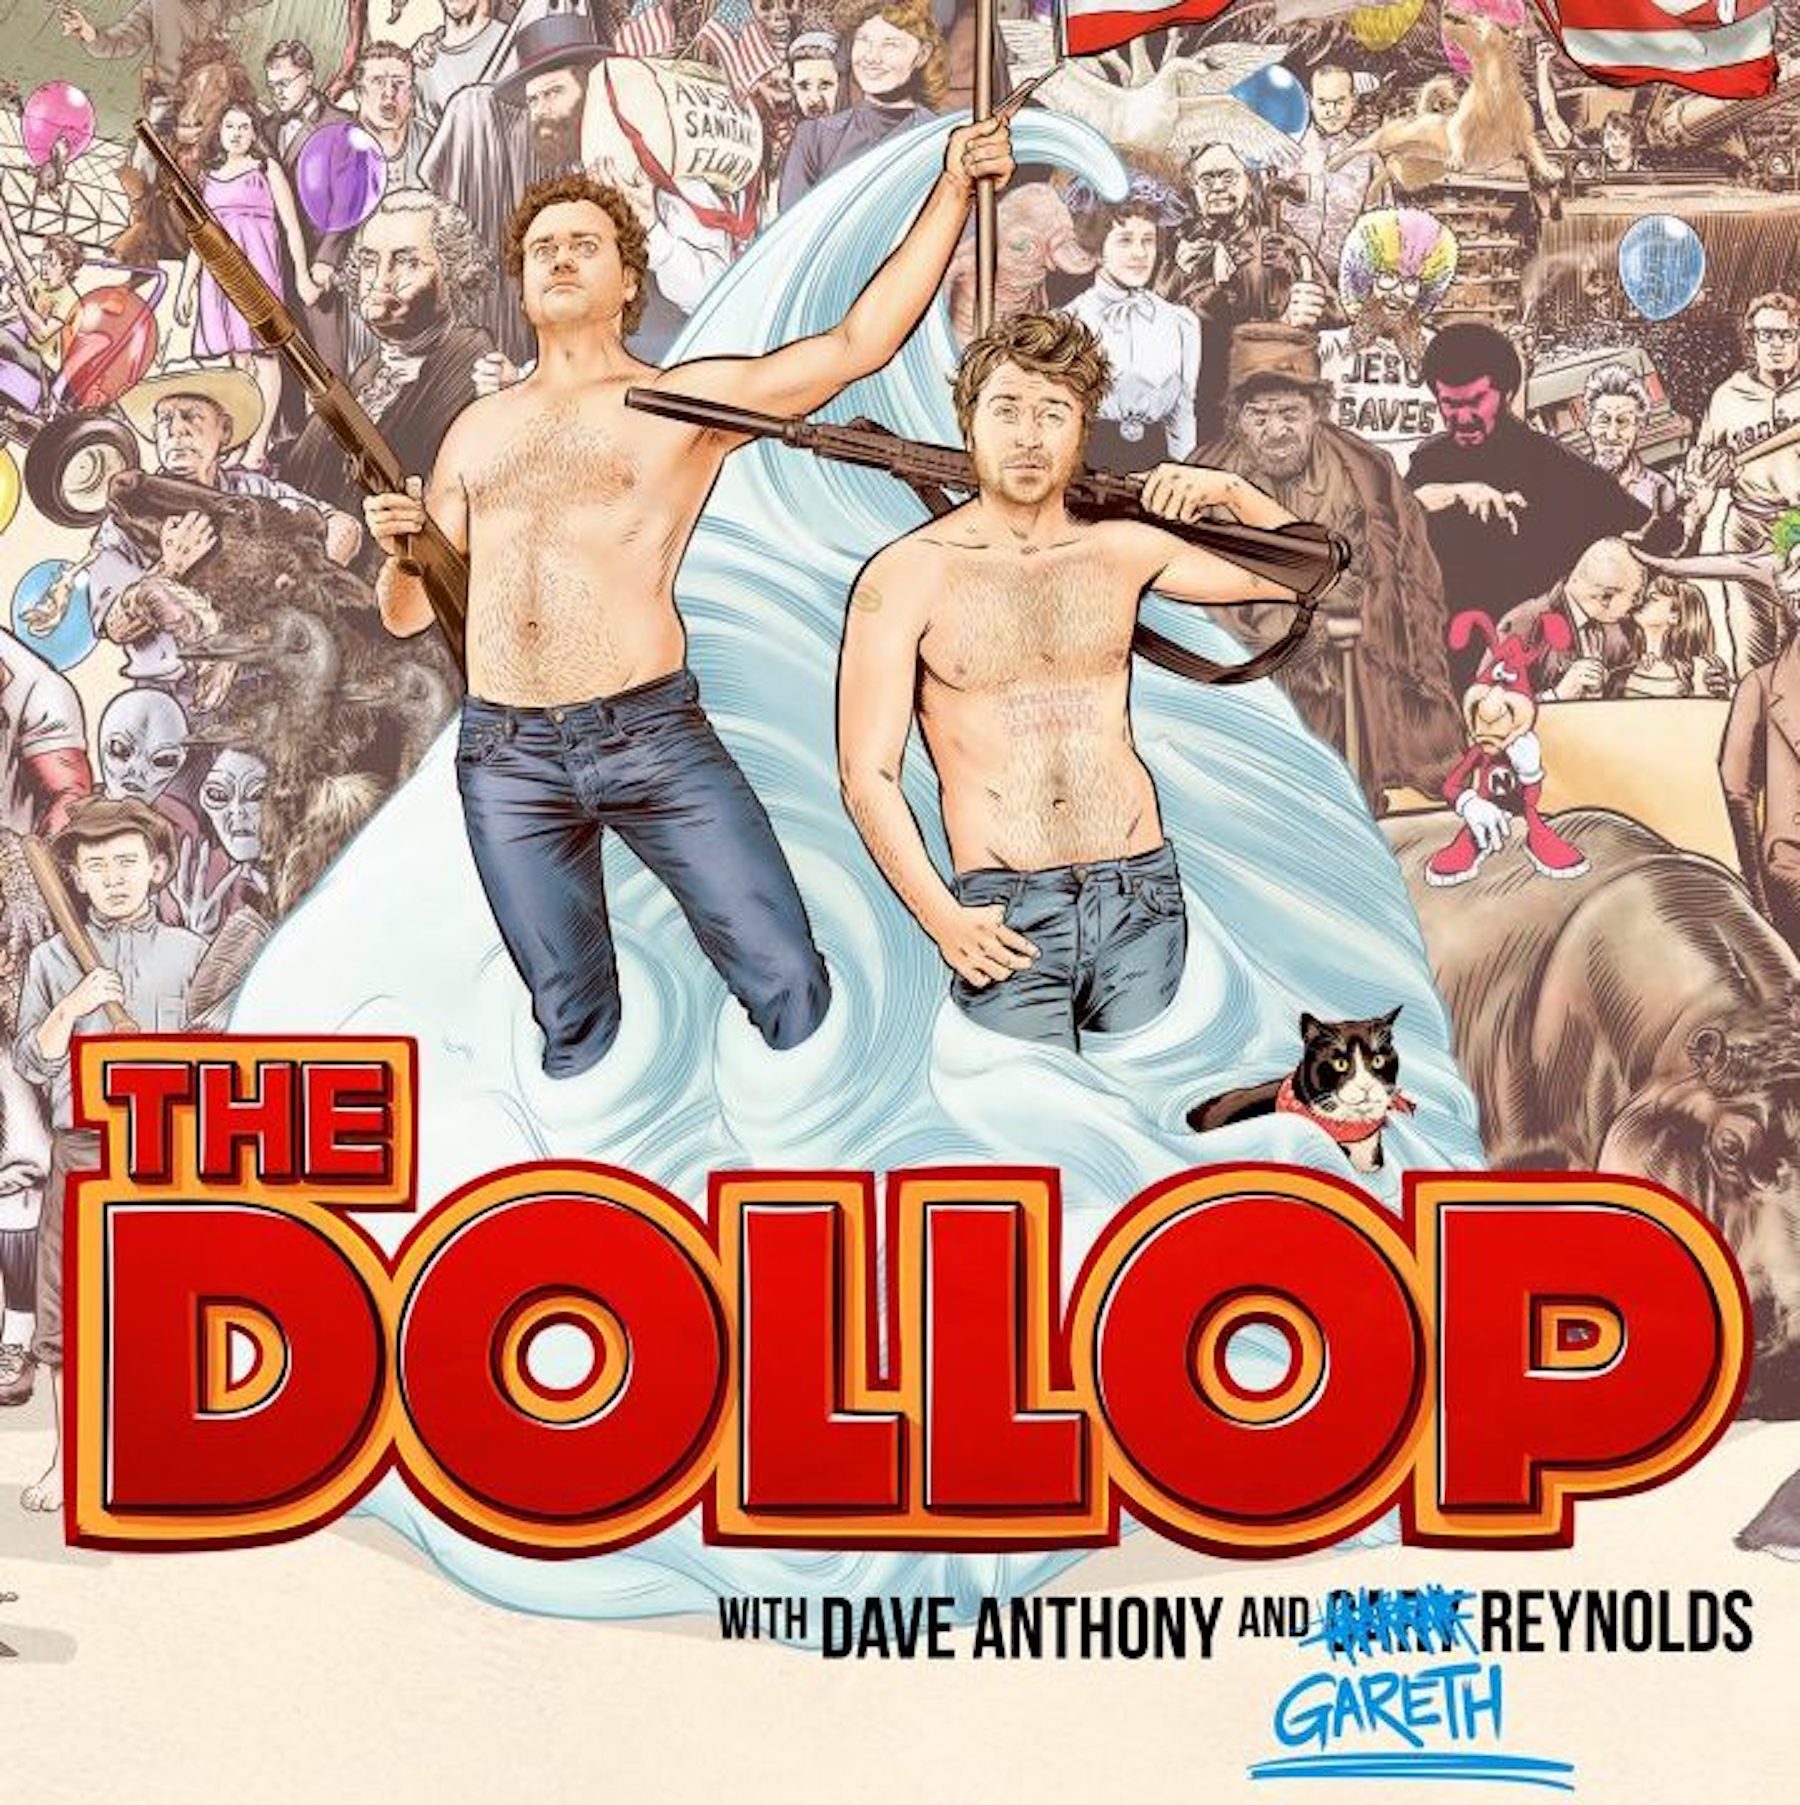 The Dollop cover featuring hosts shirtless with weapons amidst a large crowd.